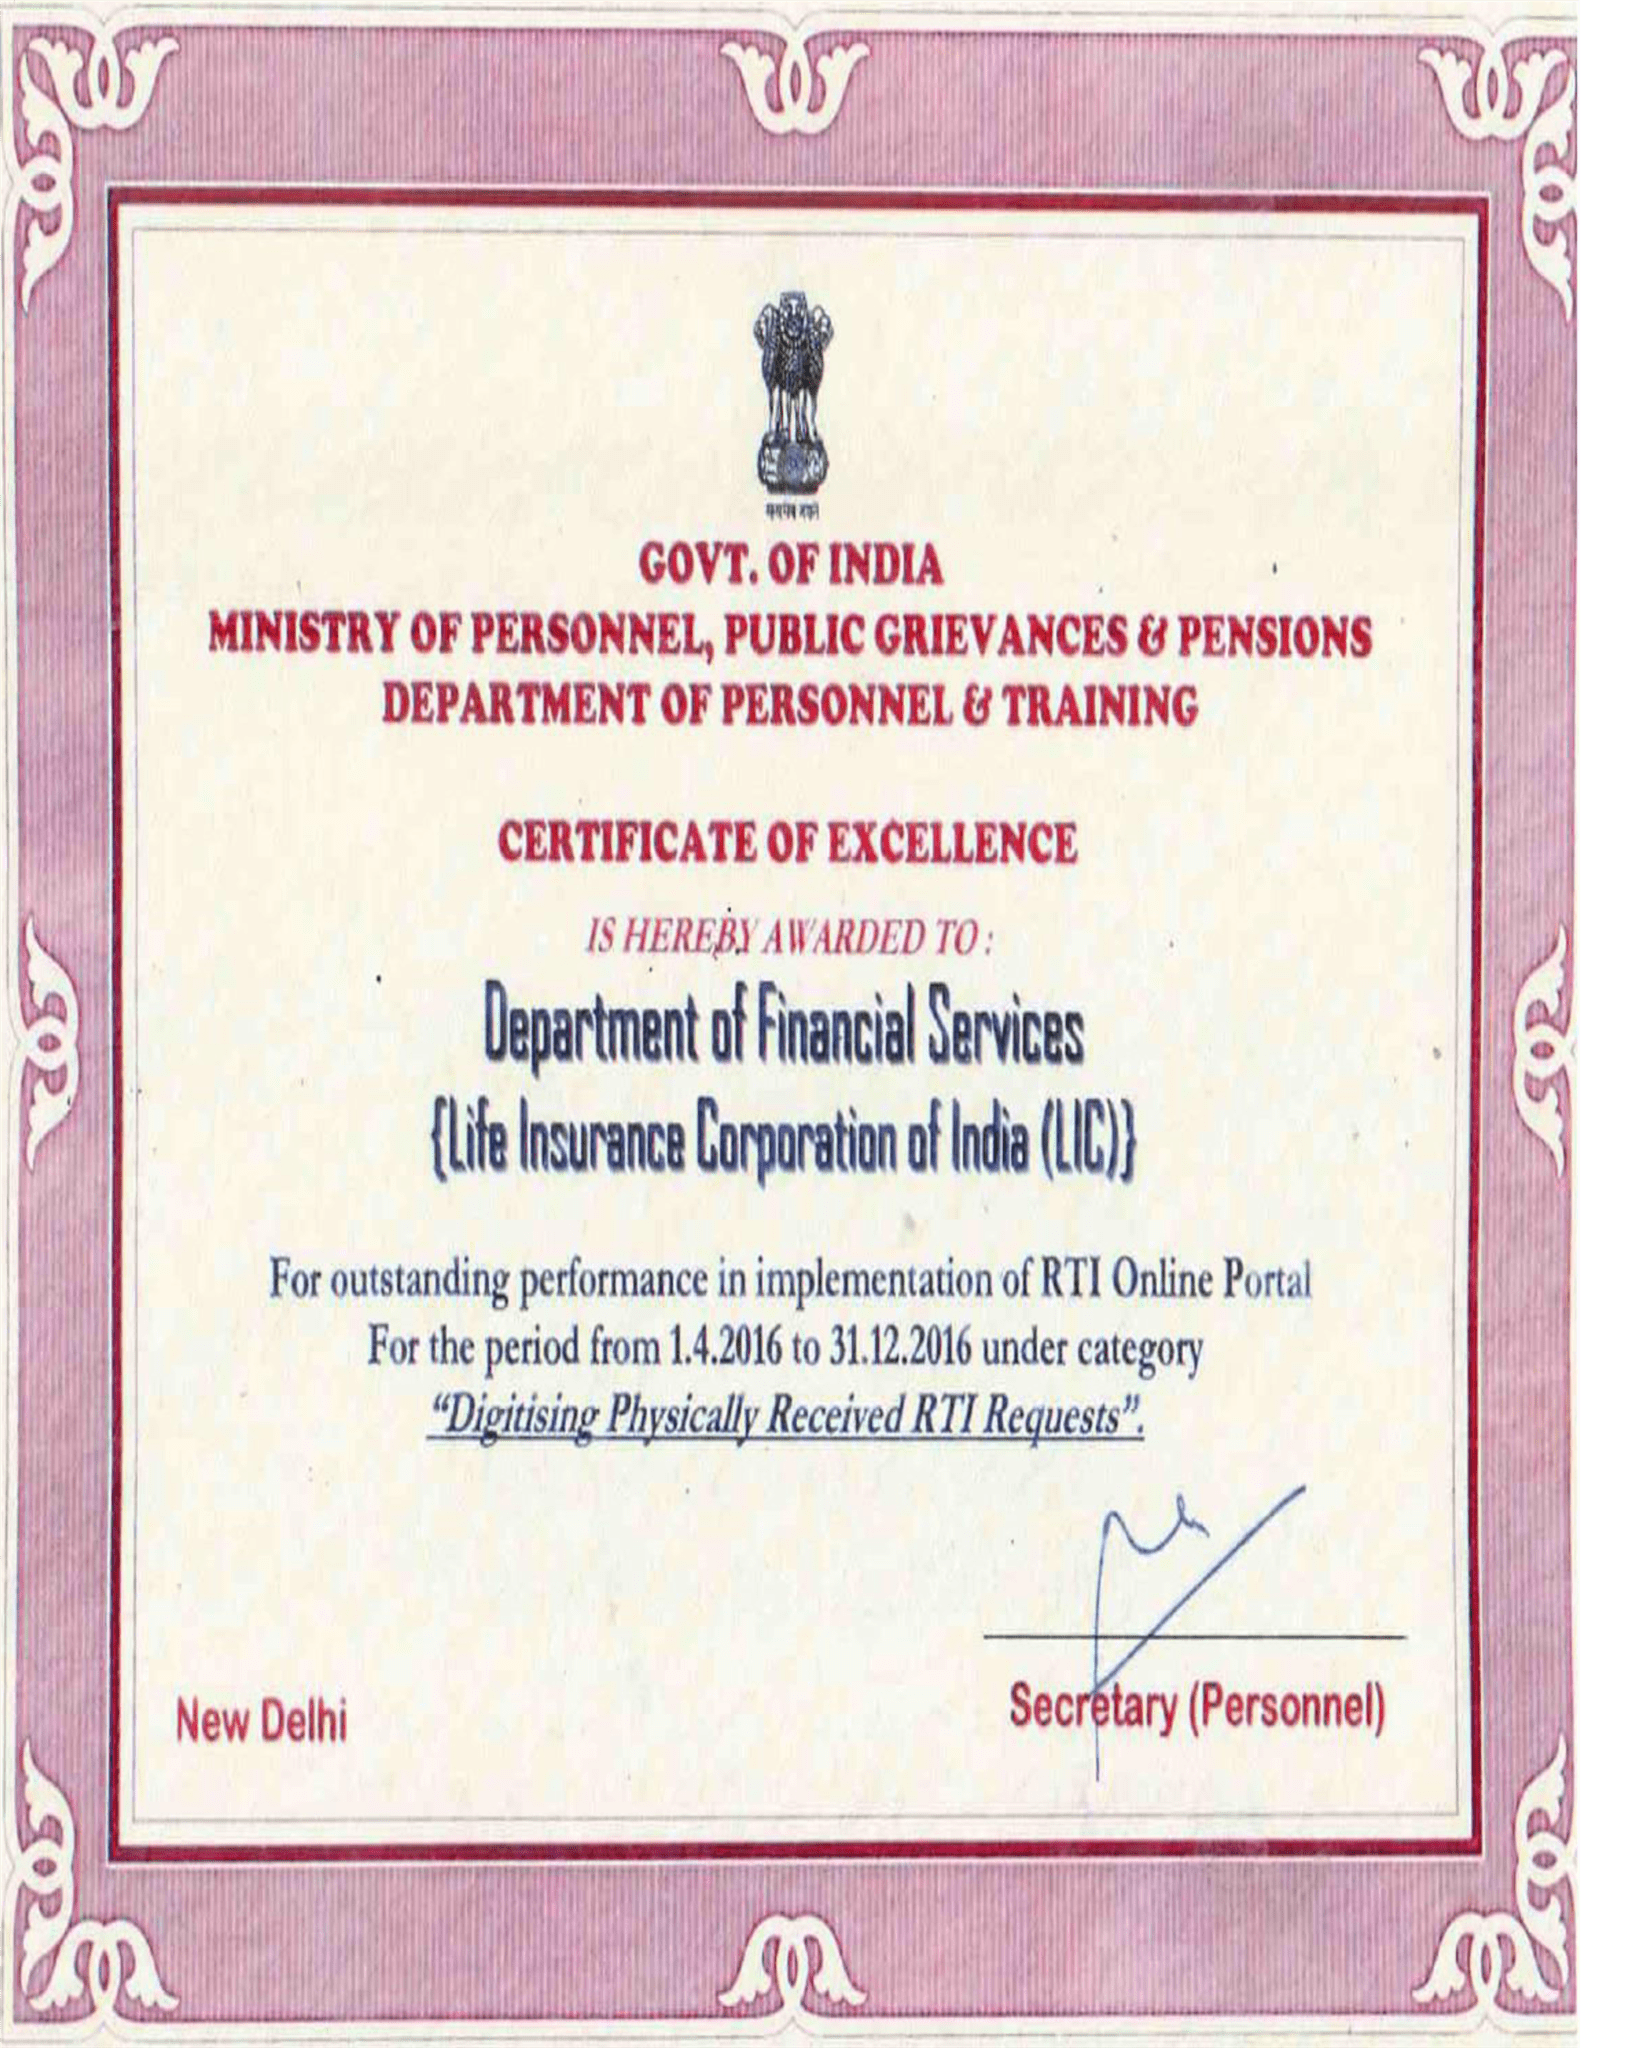 Image of Certificate of Excellence